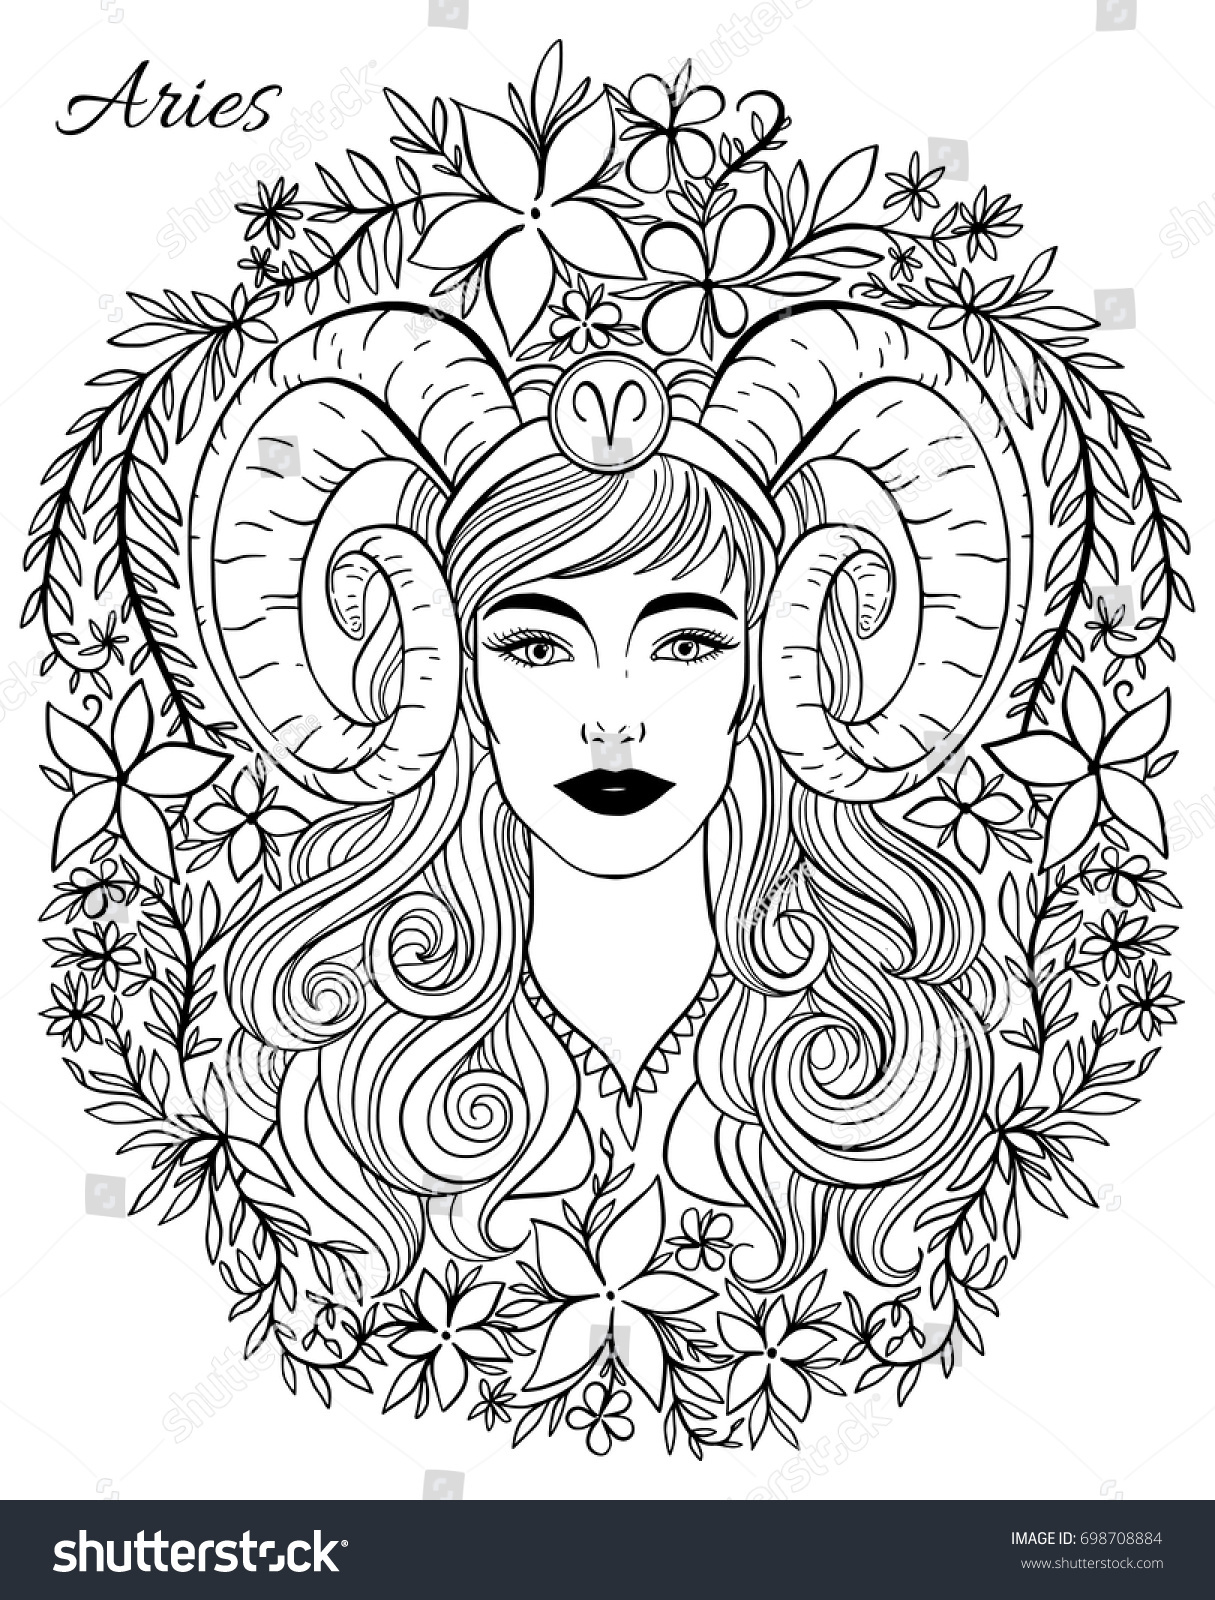 Download Zodiac Sign Aries Woman Hand Drawn Stock Vector 698708884 - Shutterstock